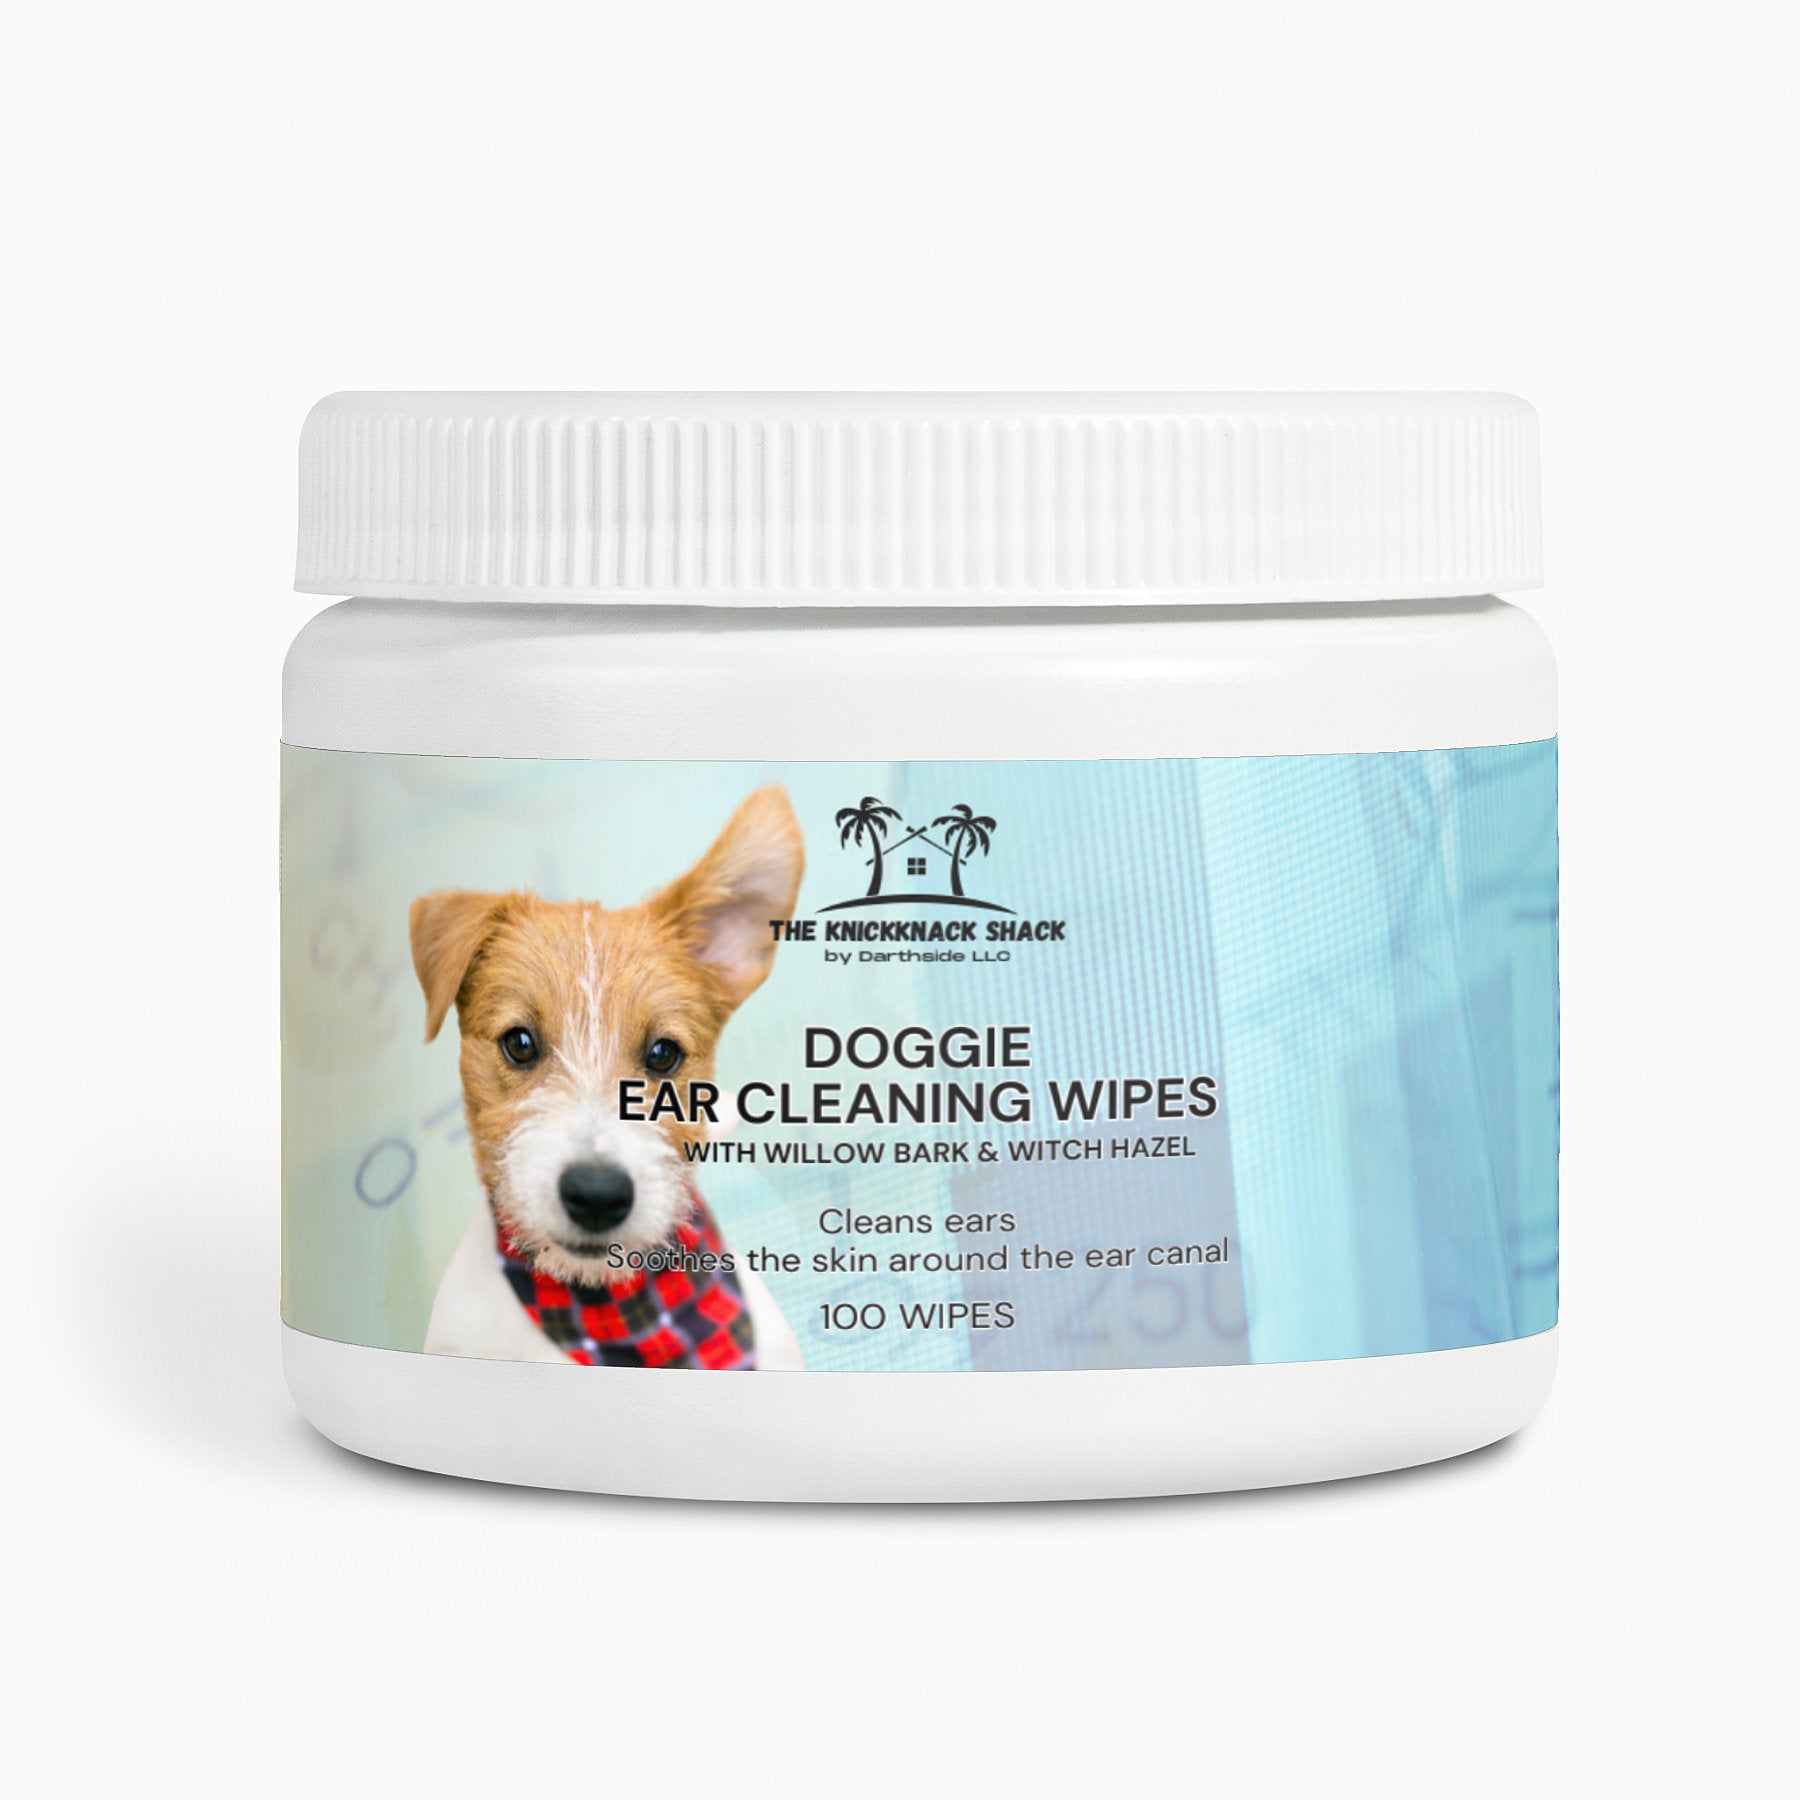 Doggie Ear Cleaning Wipes